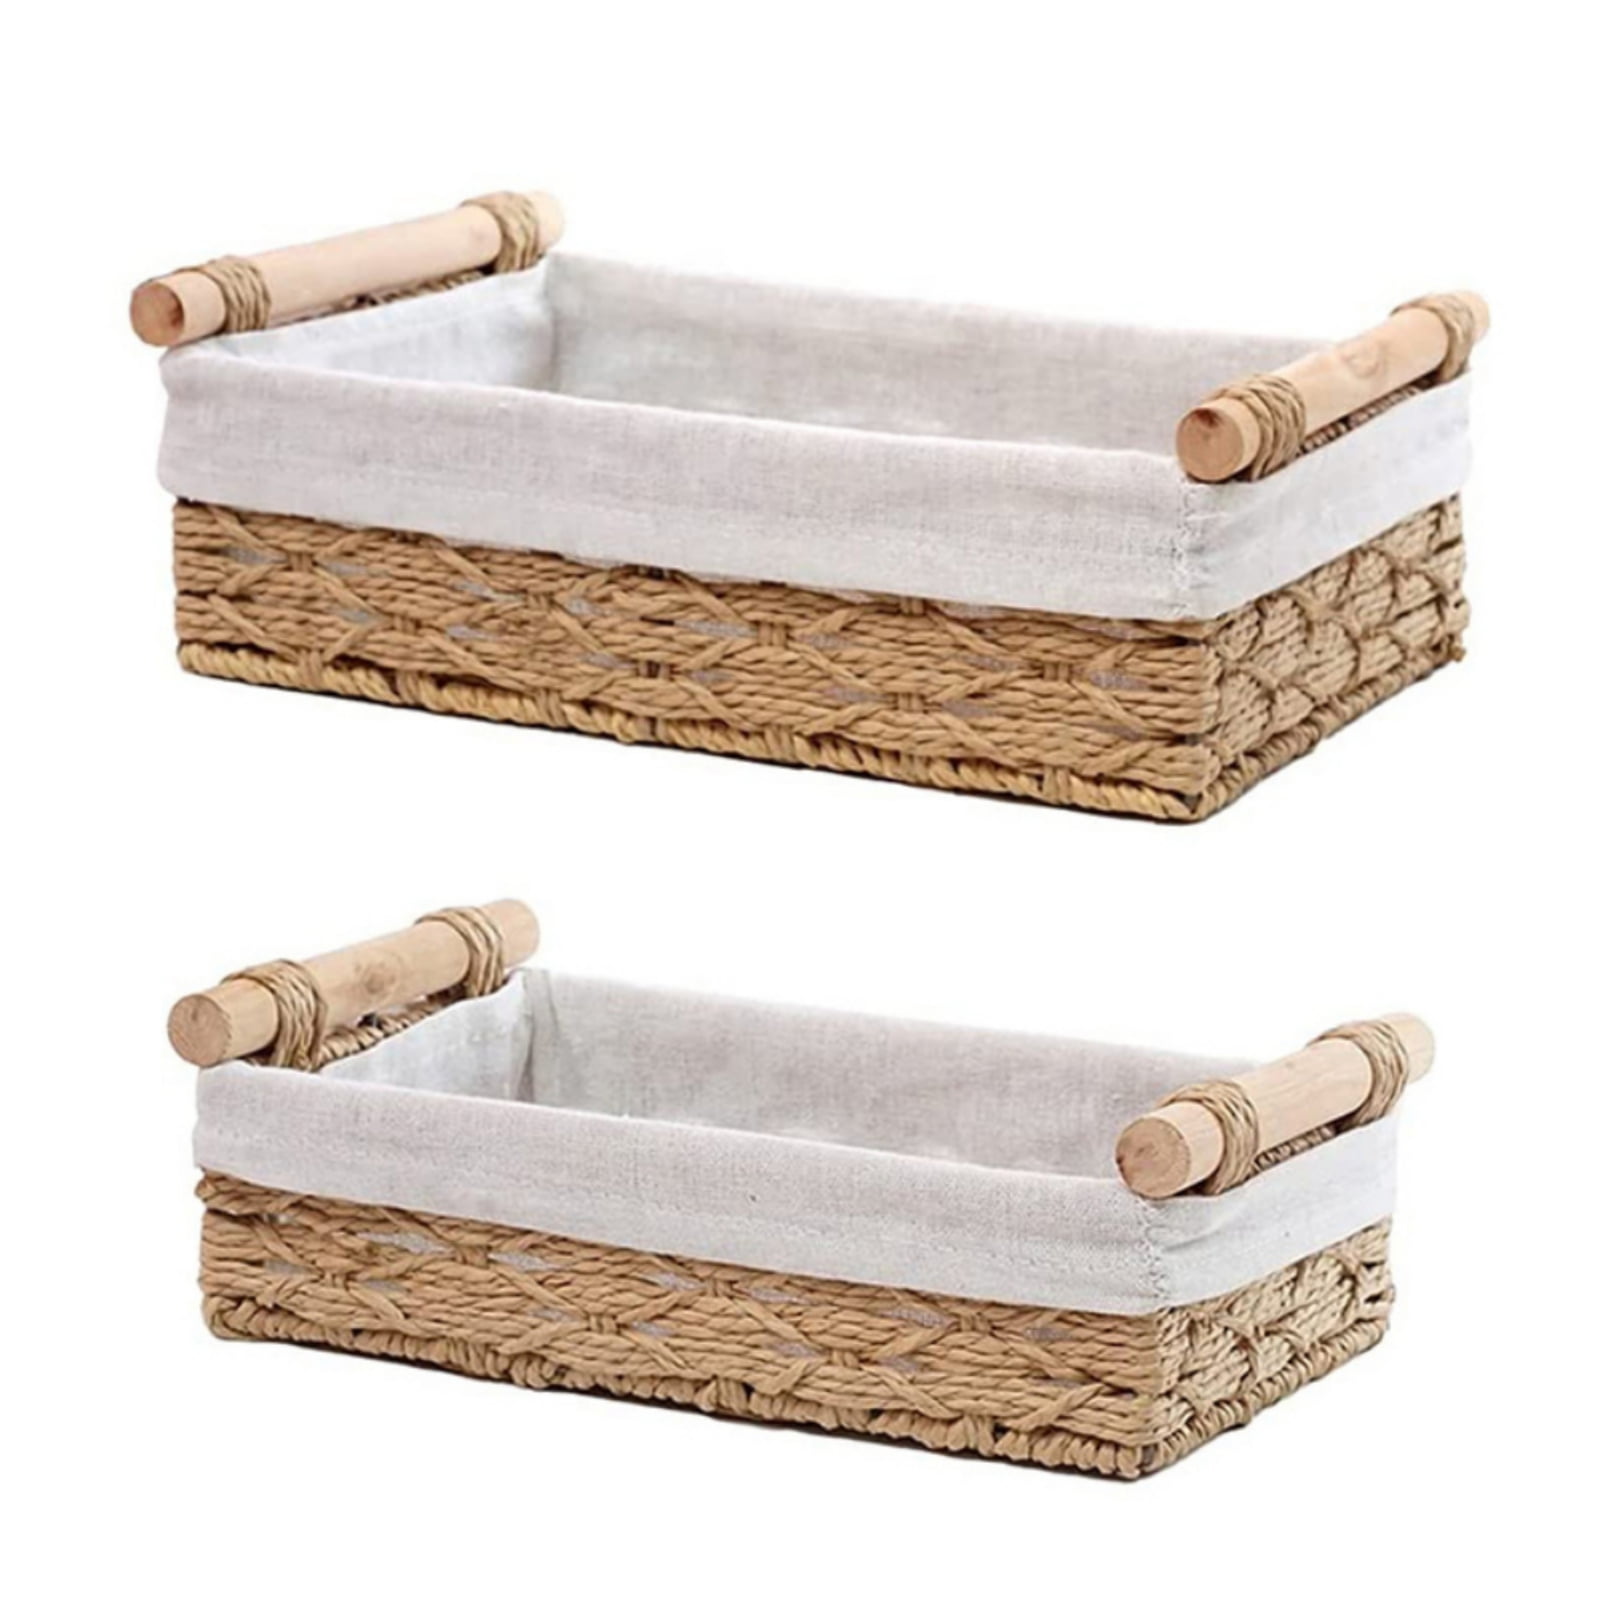 Bathroom Decor Basket, Cotton Woven Decorative Boxes for Countertop  Organizing, Small Baskets Storage for Toilet Paper, Cosmetic Perfume and  Personal Items,1PC 